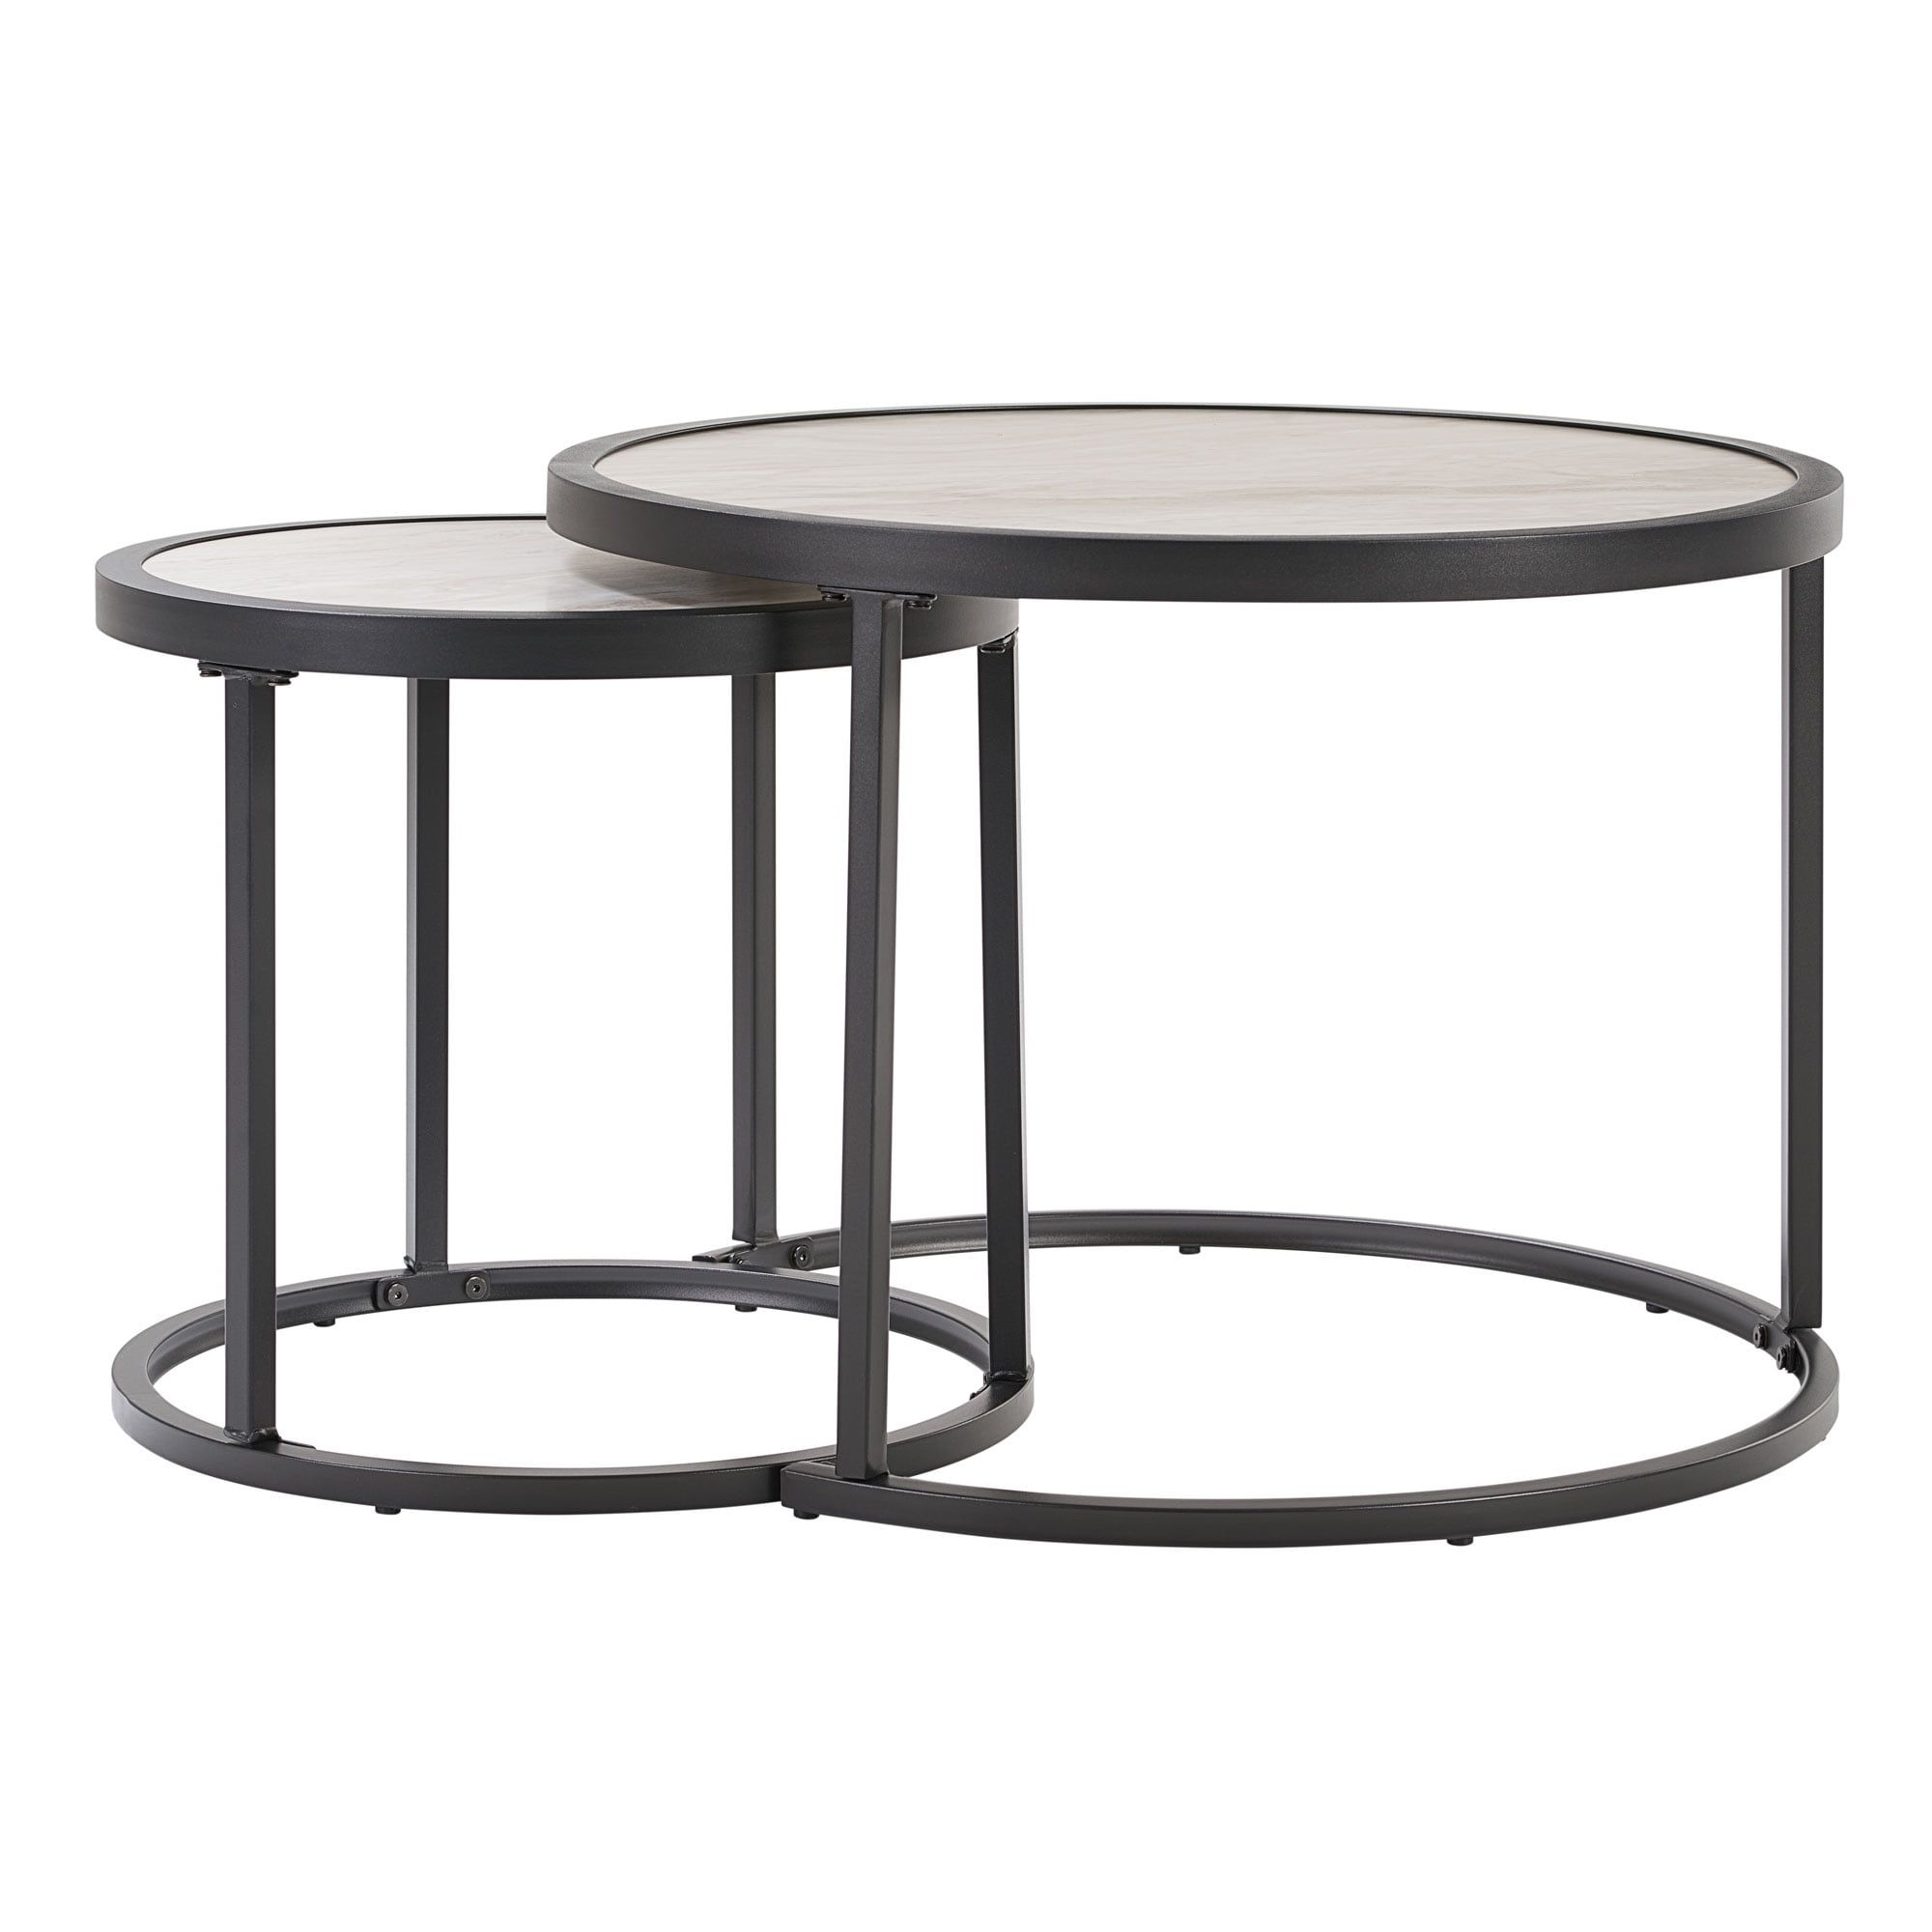 Most Recent Oaks Table Set With Patio Cover Within Better Homes & Gardens River Oaks 3 Piece Sofa And Nesting Tables With Patio  Cover, Dark – Walmart (View 14 of 15)